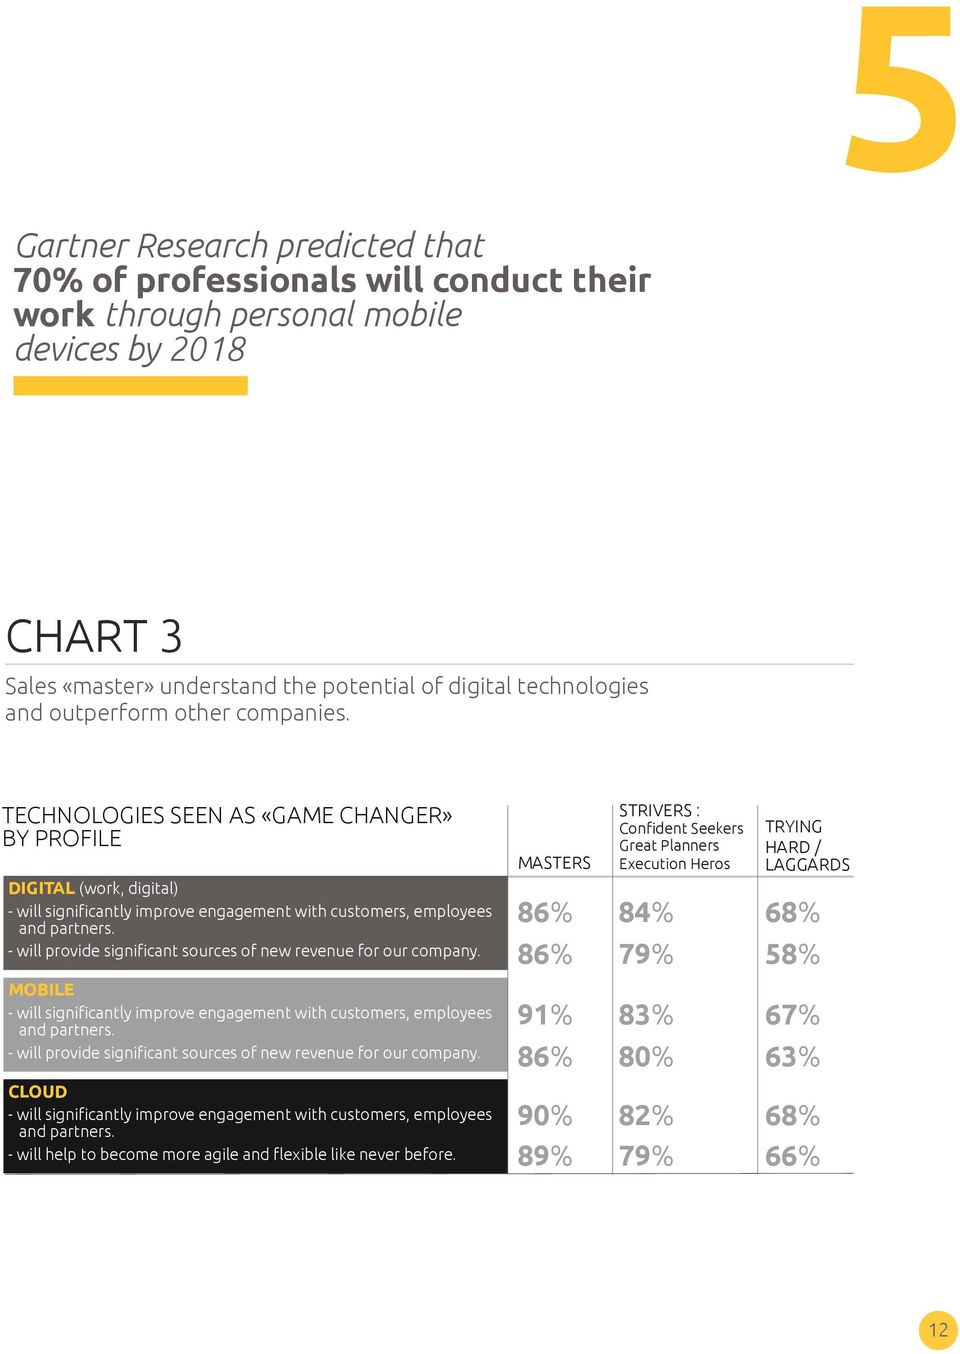 TECHNOLOGIES SEEN AS «GAME CHANGER» BY PROFILE MASTERS STRIVERS : Confident Seekers Great Planners Execution Heros TRYING HARD / LAGGARDS DIGITAL (work, digital) - will significantly improve